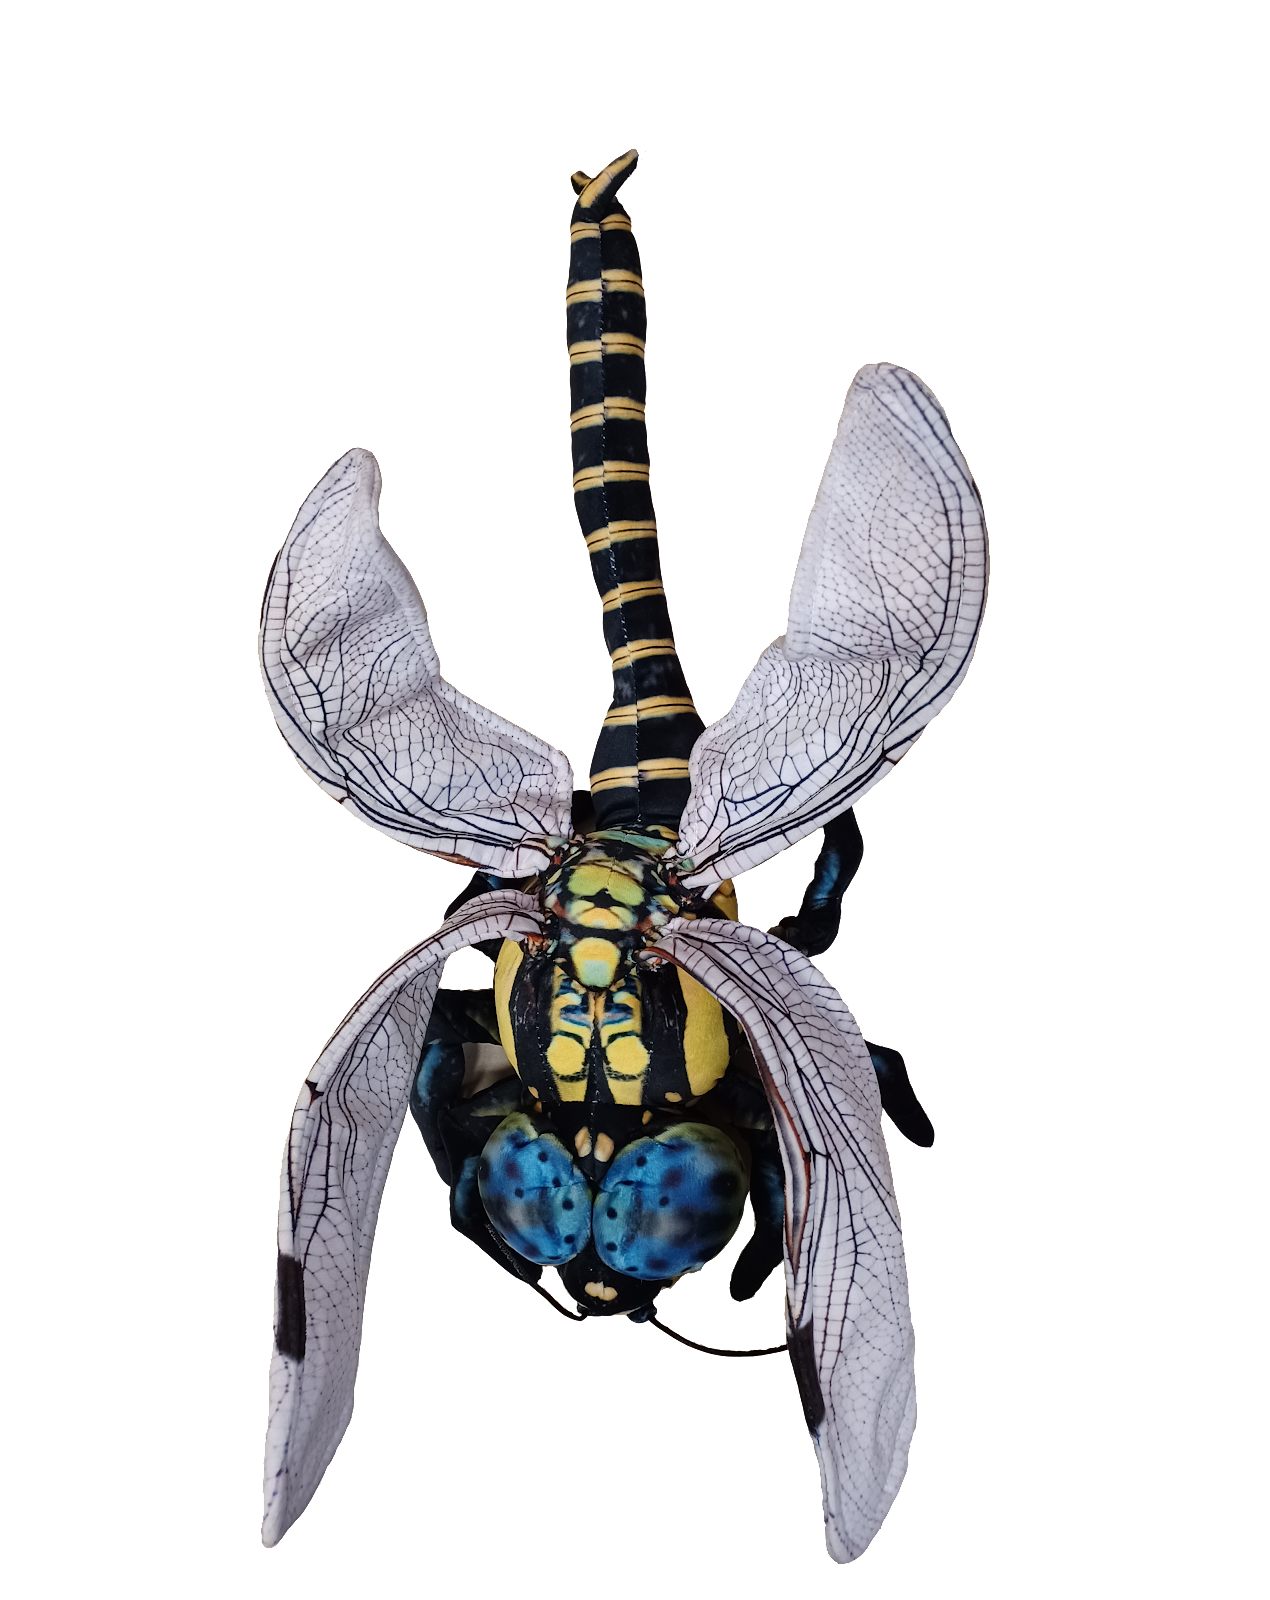 Dragonfly 21.65" Plush Stuffed Animal Insect